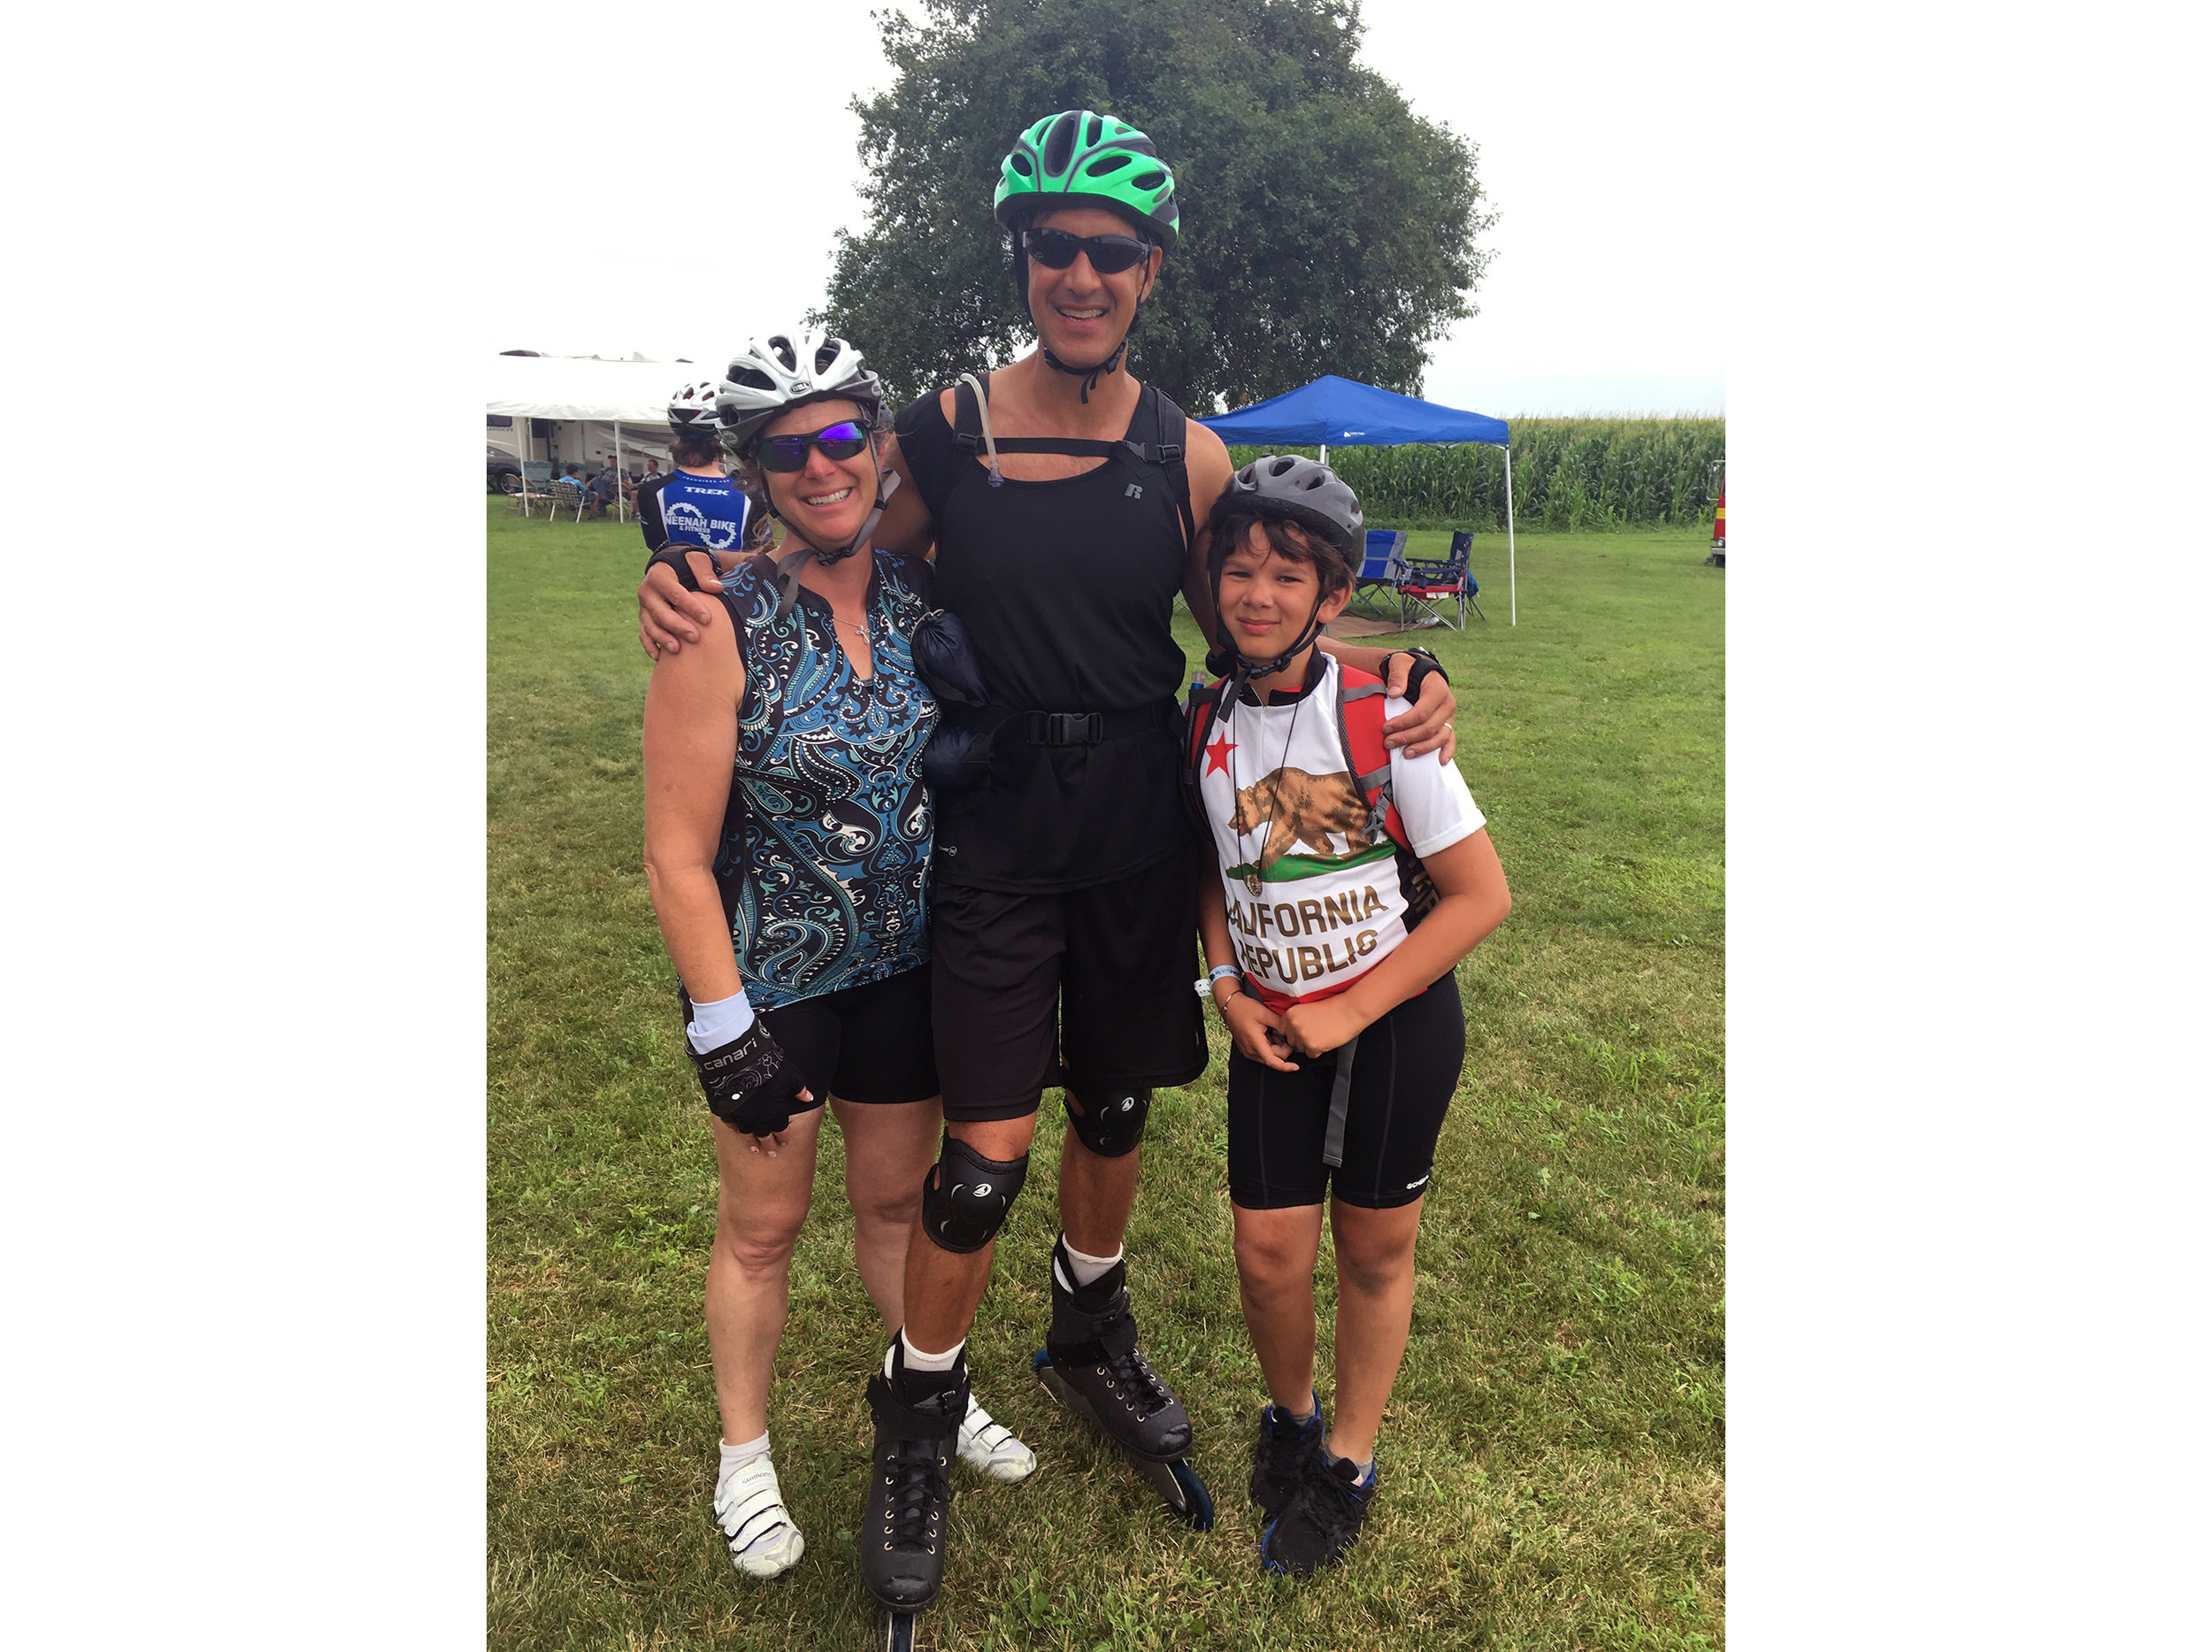  Carl and his family are from San Diego, California. Carl completes the entire Ragbrai route on roller blades, something he has accomplished many times. 